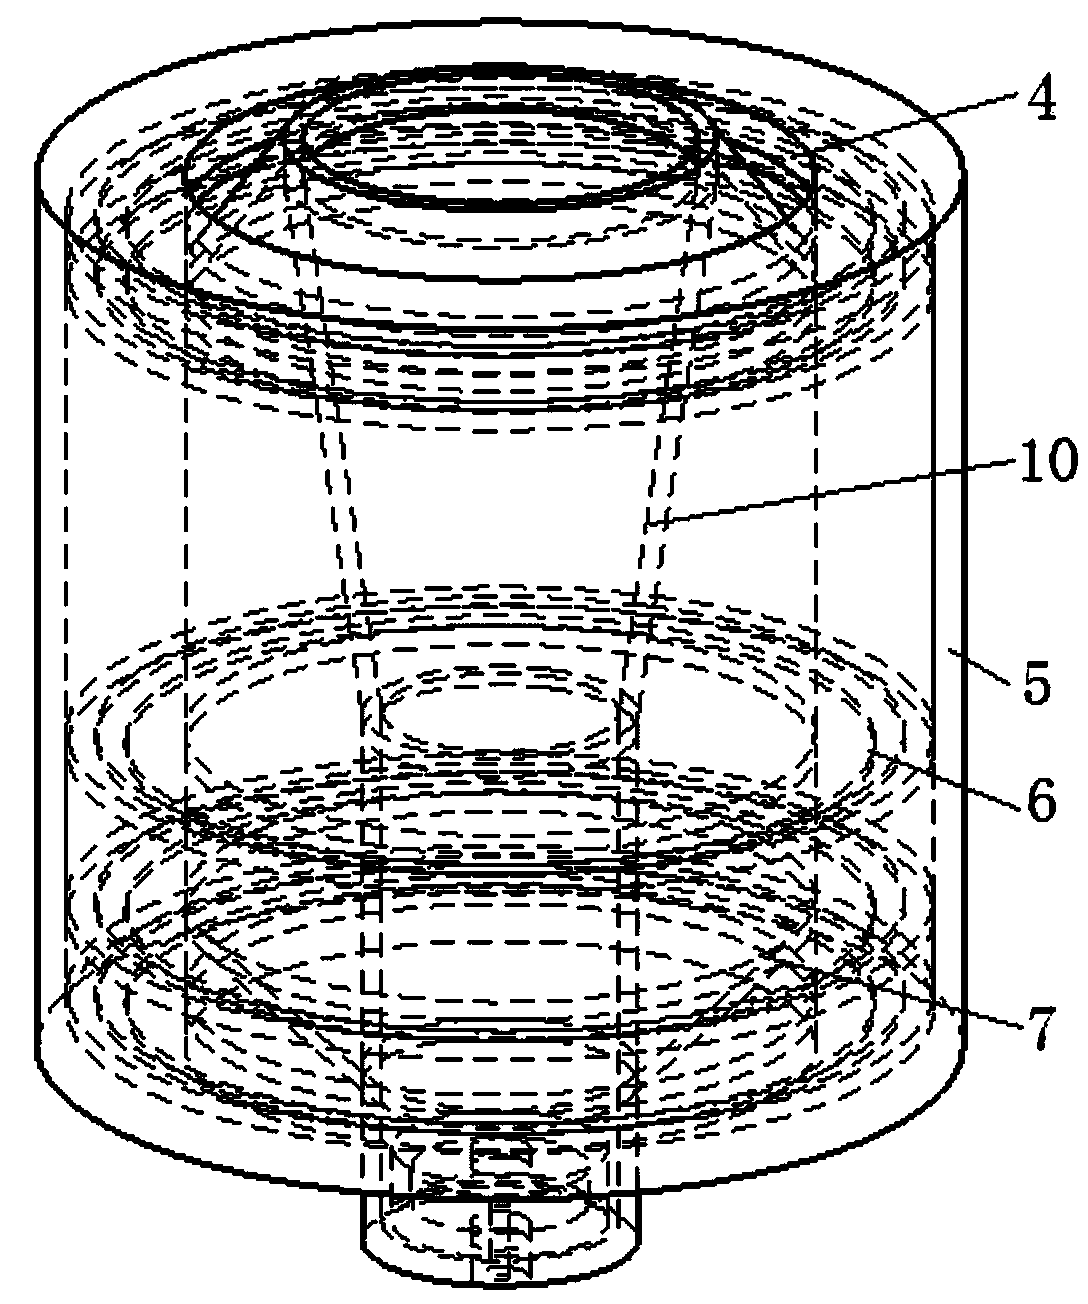 Multistage cusped magnetic field plasma thruster with channel magnetic field guide structure